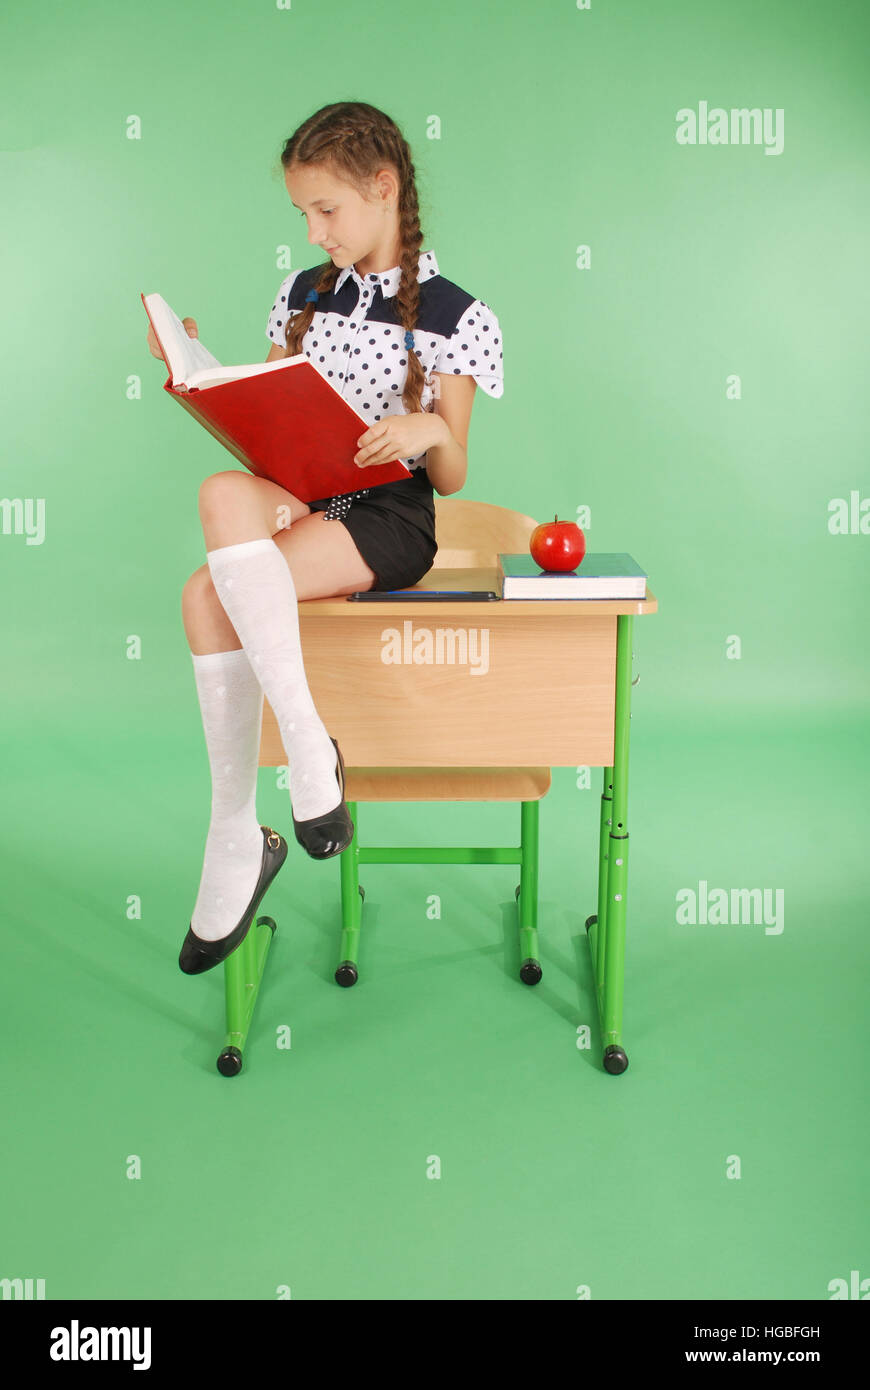 Girl in a school uniform sitting on desk and reading a book isolated on green Stock Photo